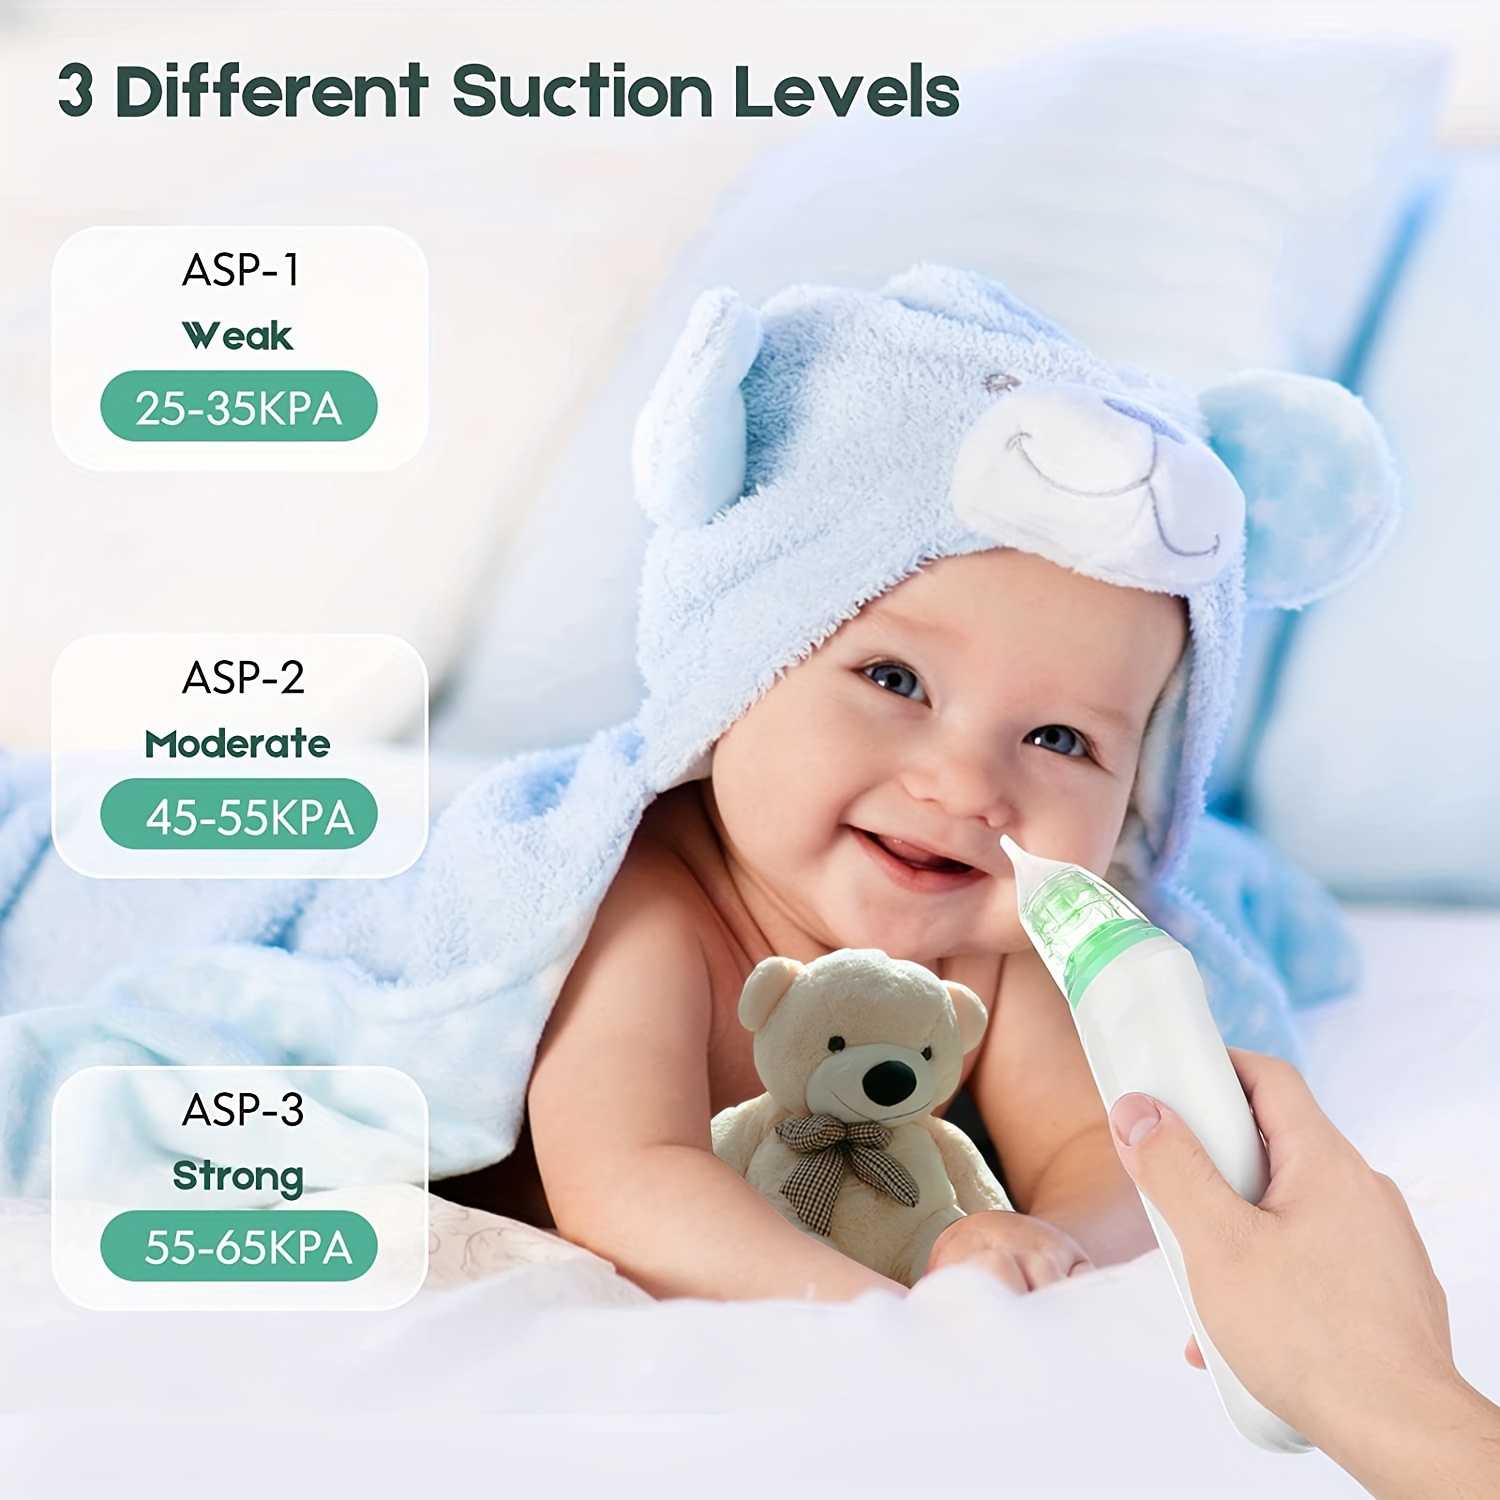 Electric Baby Nose Sucker with Adjustable 6 Levels Suction